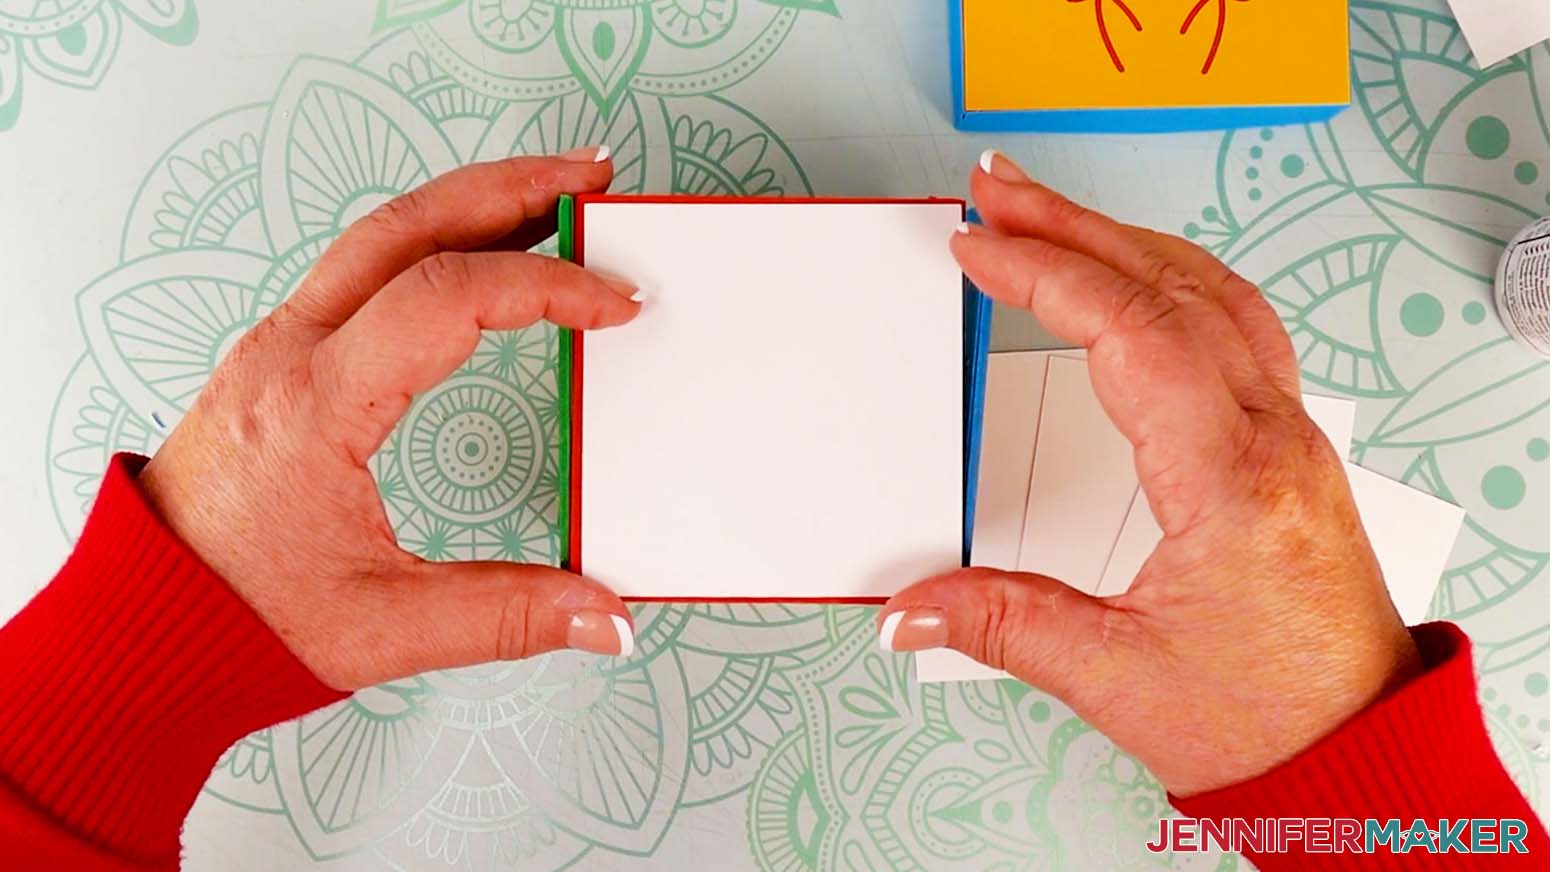 Glue the plain white square onto the cardboard jumping box side panel, making sure to face it the correct direction